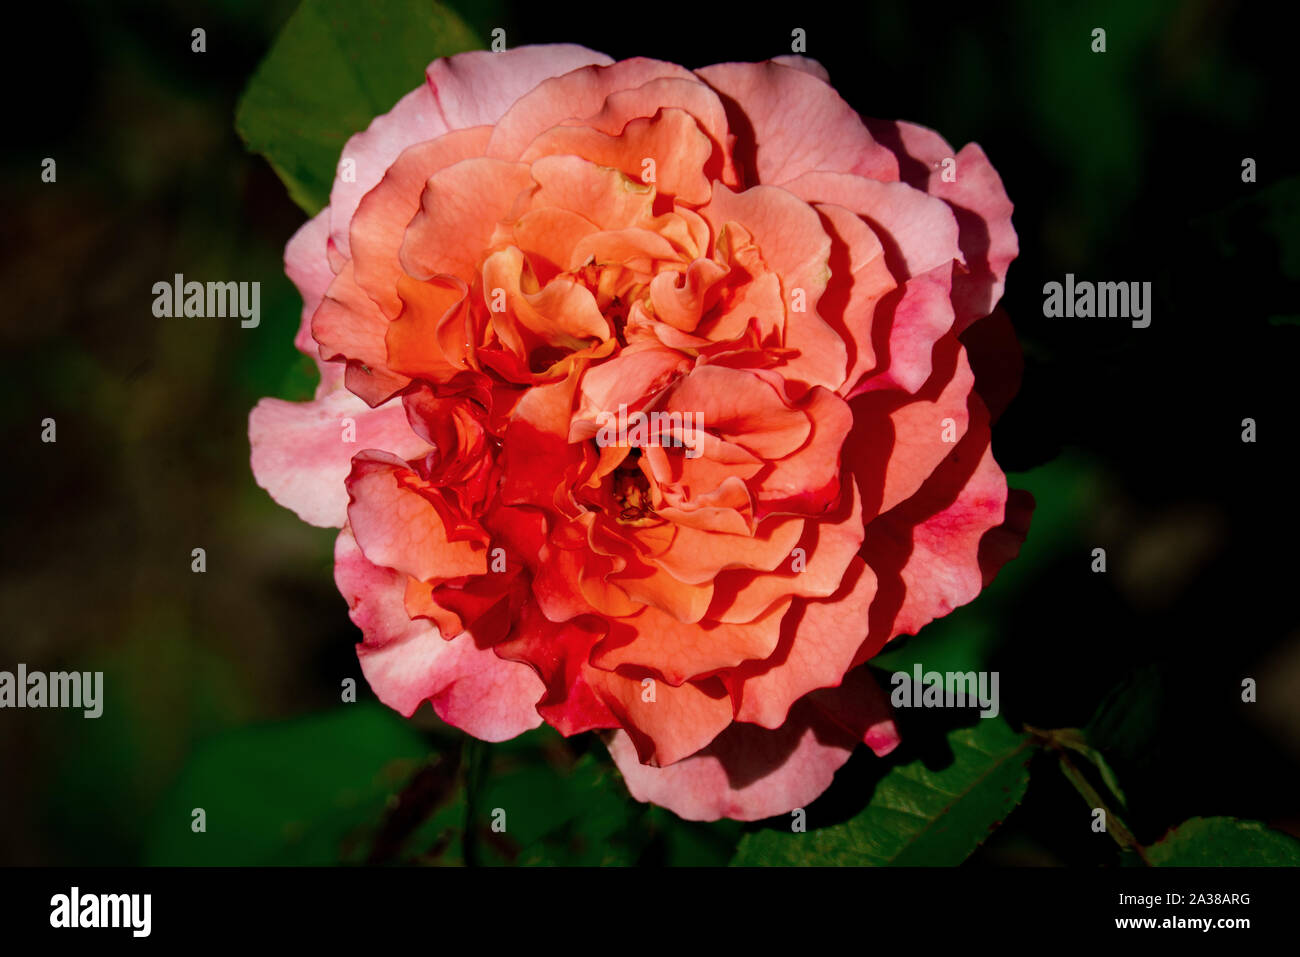 Colourful close up of an Augusta Luise rose orange flower bloom with a dark bokeh background Stock Photo